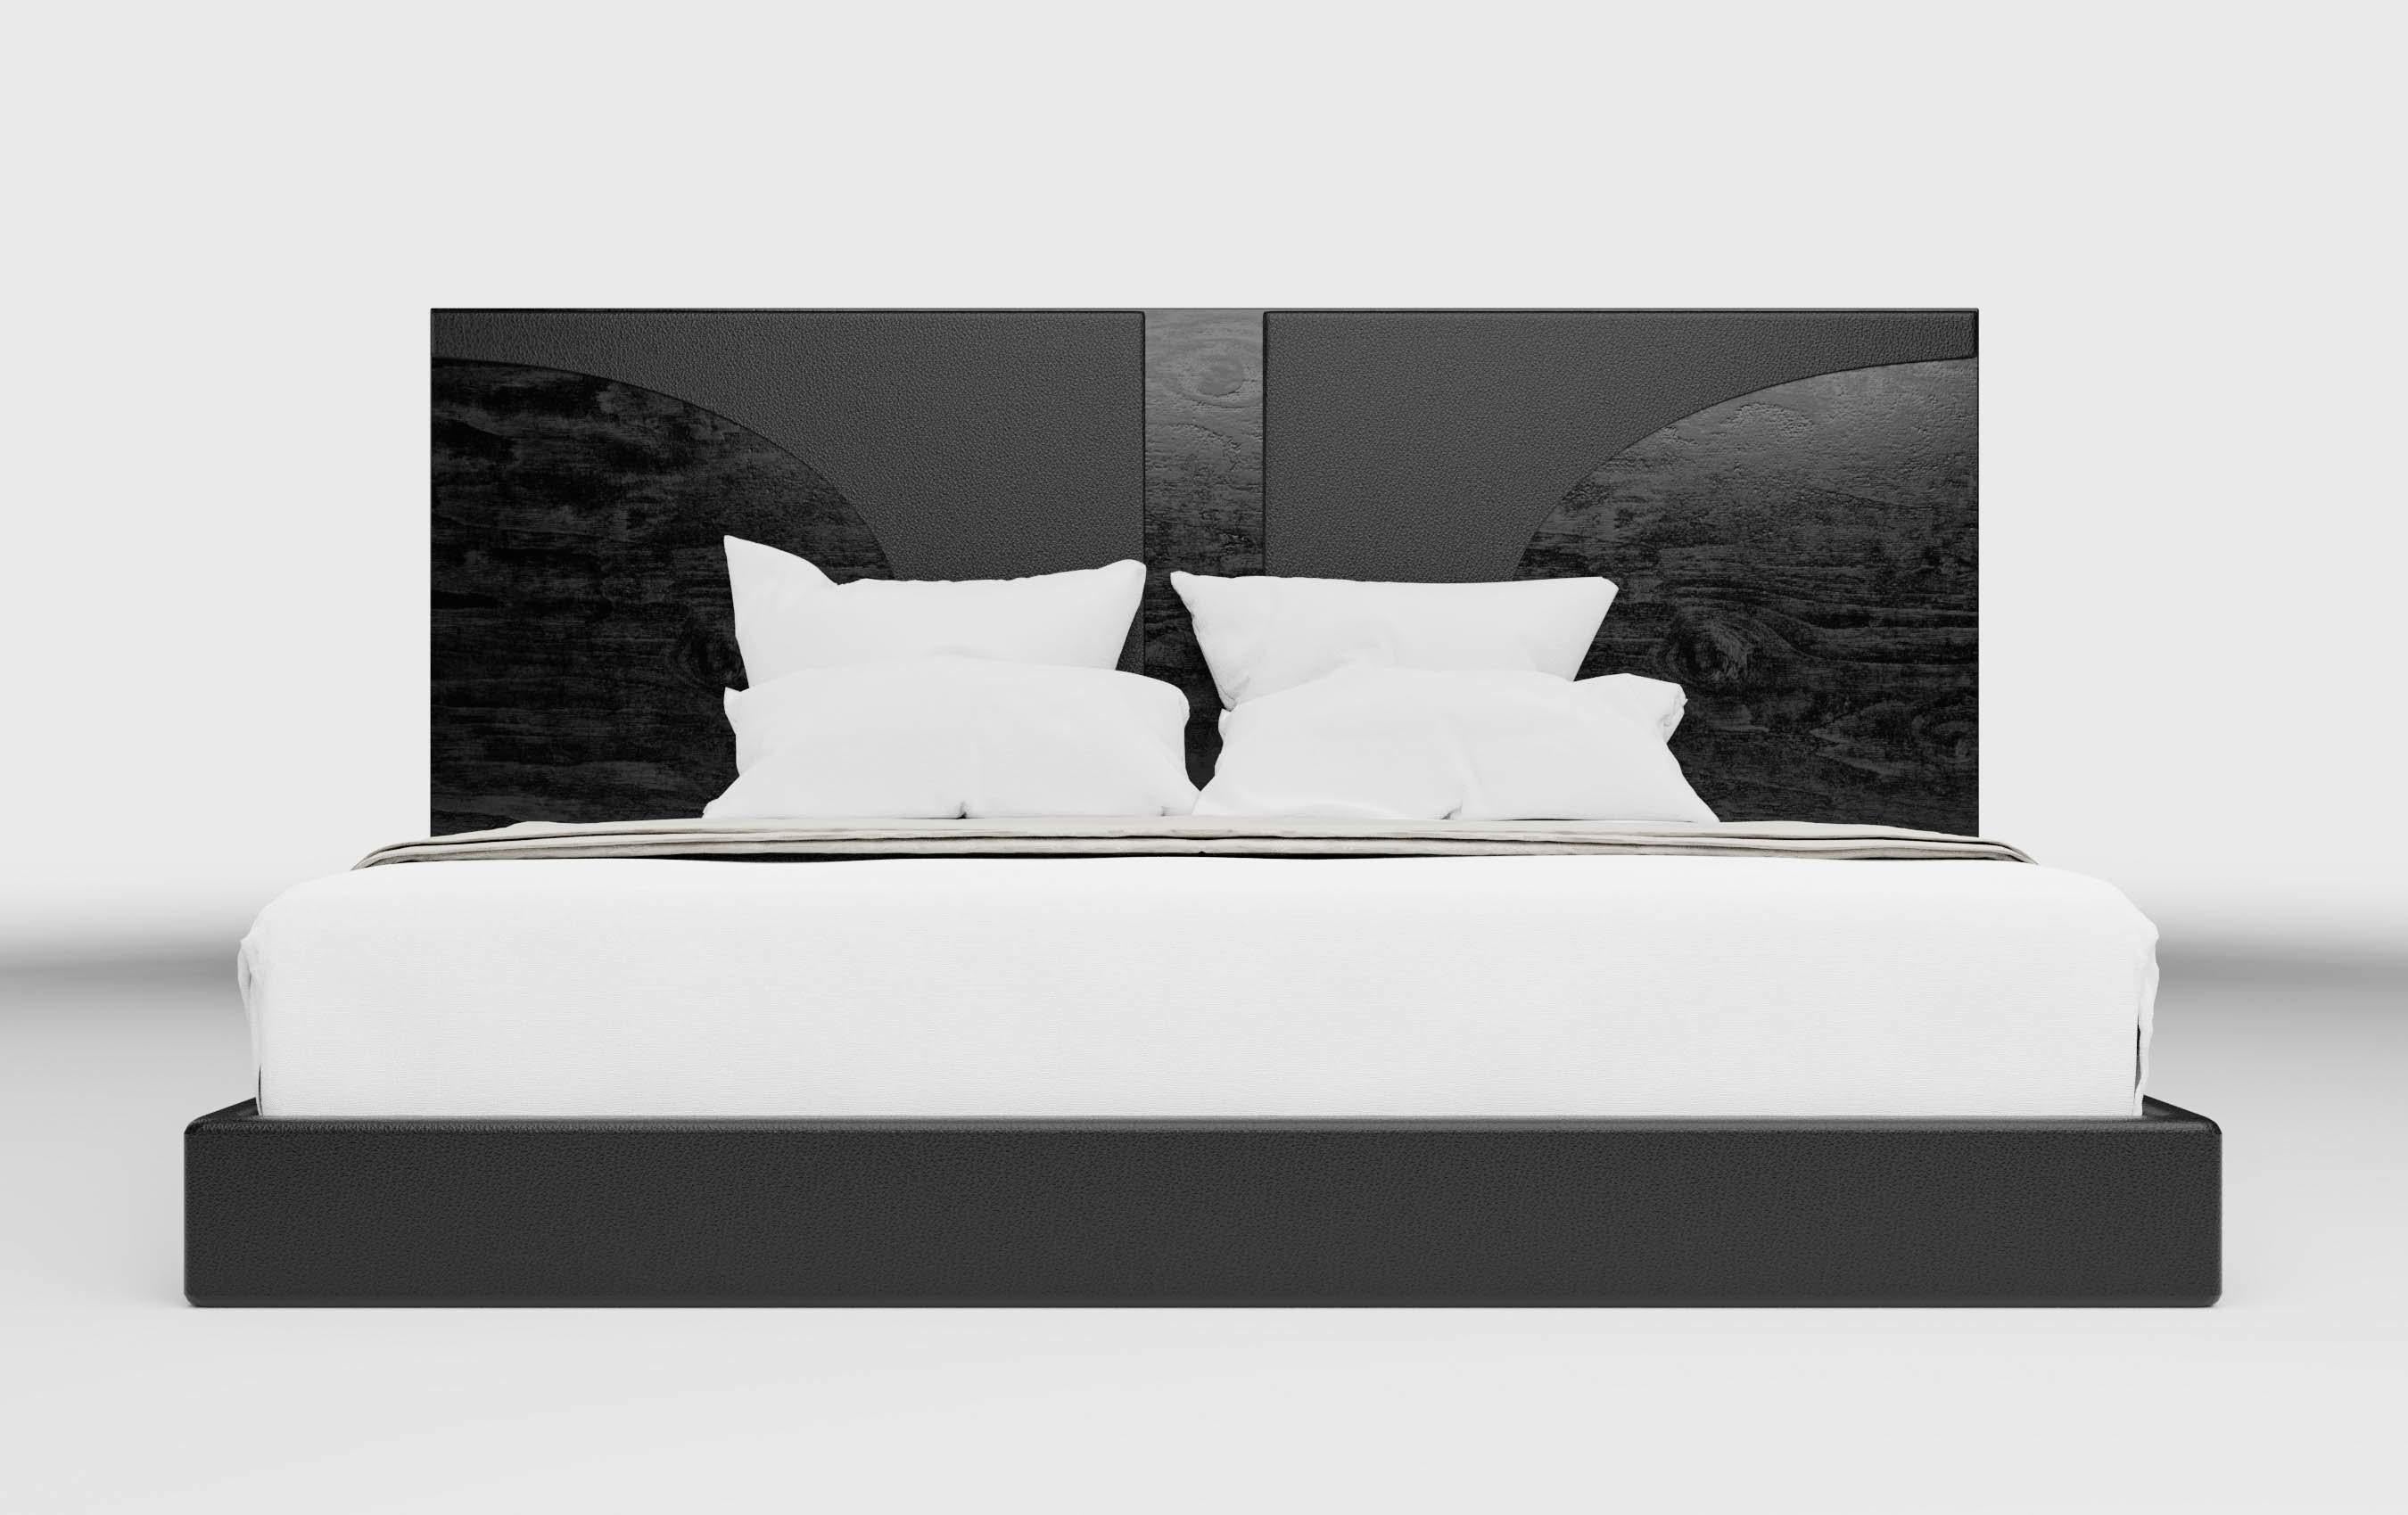 The Laguna bed features a beautifully executed circular design element and is at its best with a dynamic contrast of matte and glossy materials. It is part of the Ortiz Milano brand that is designed in California and manufactured in Italy. It is